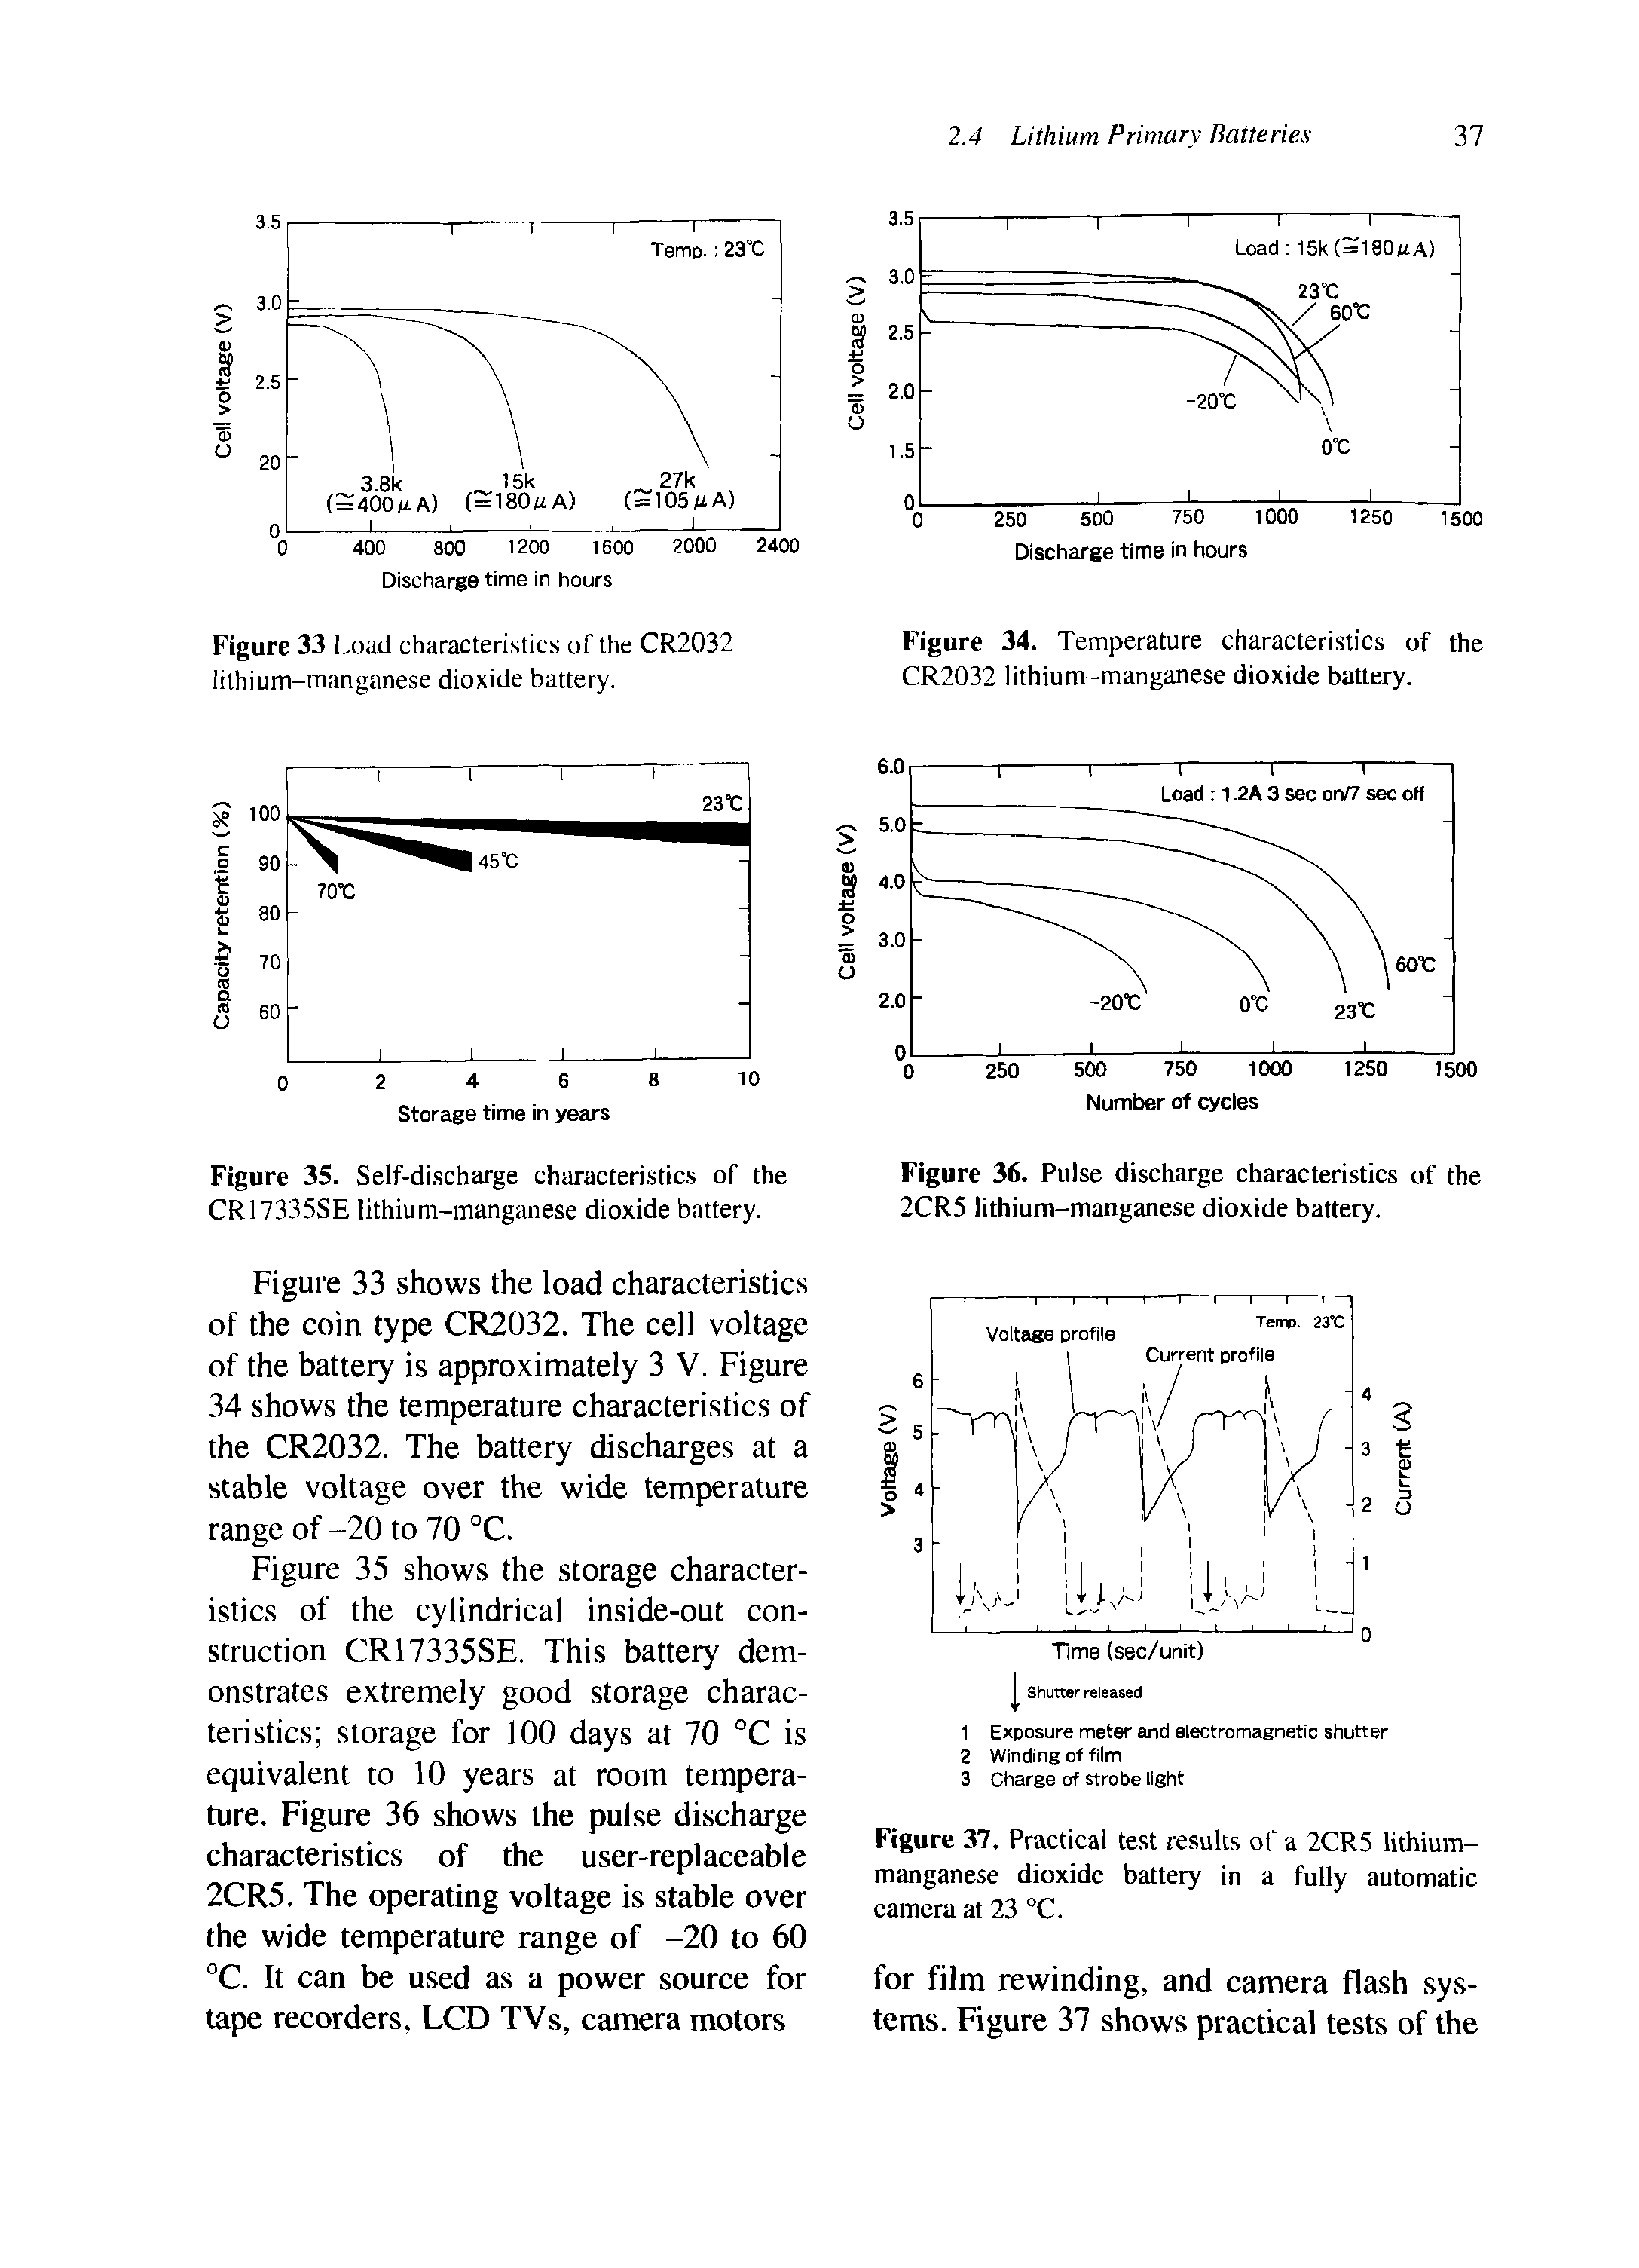 Figure 36. Pulse discharge characteristics of the 2CR5 lithium-manganese dioxide battery.